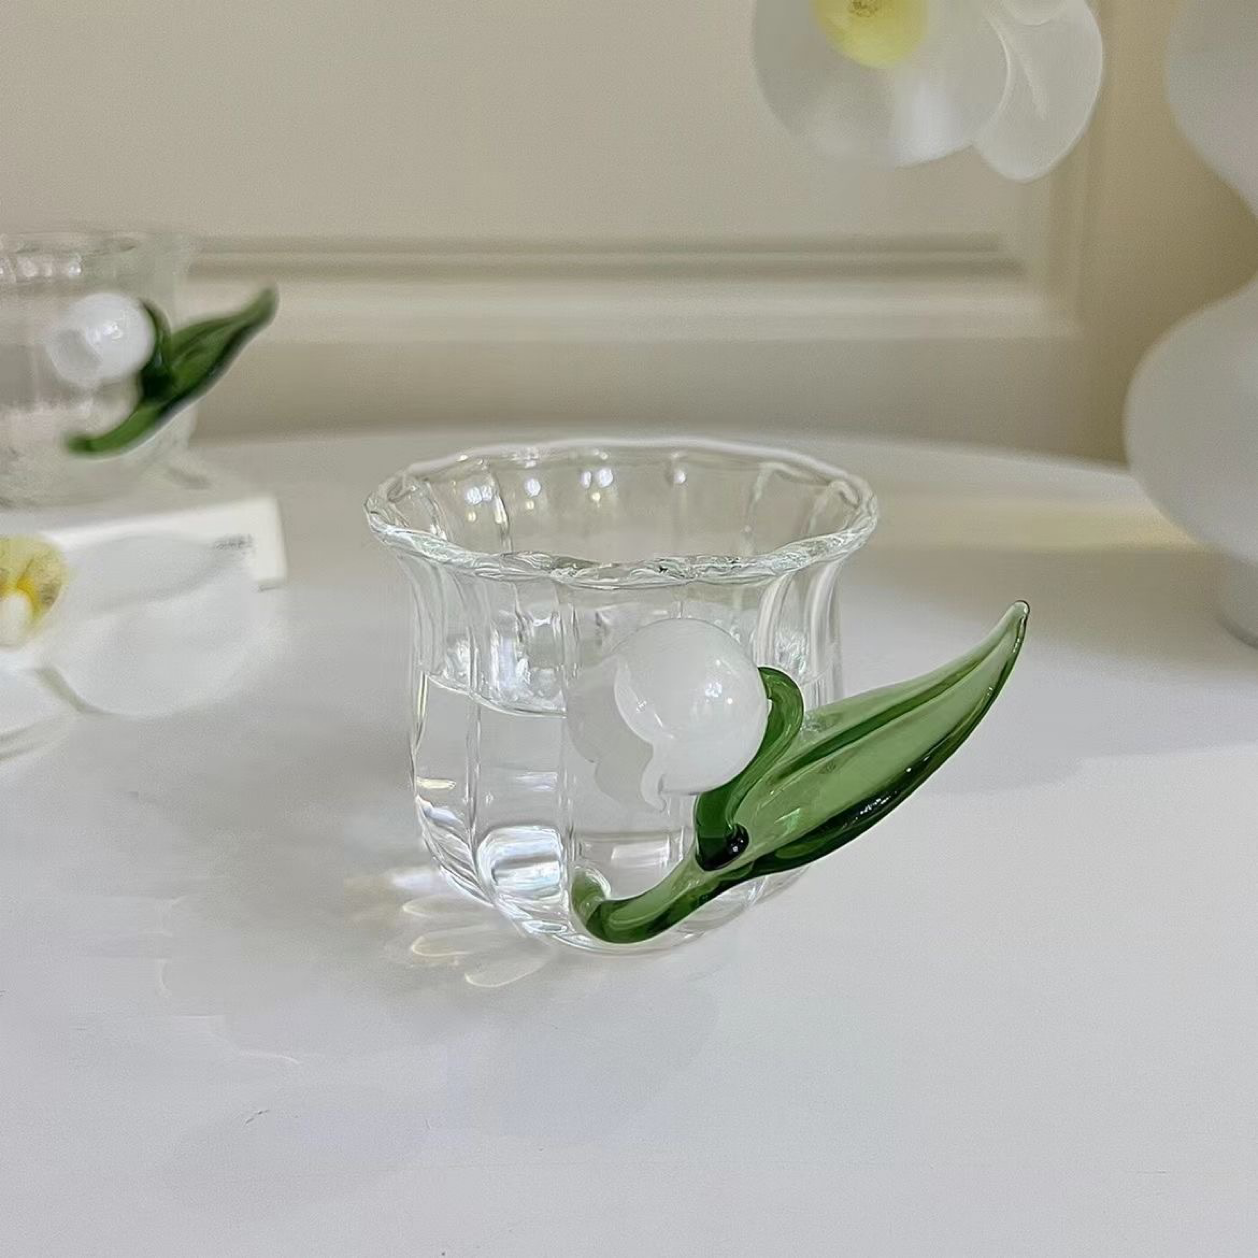 Three-dimensional lily of the valley teacup